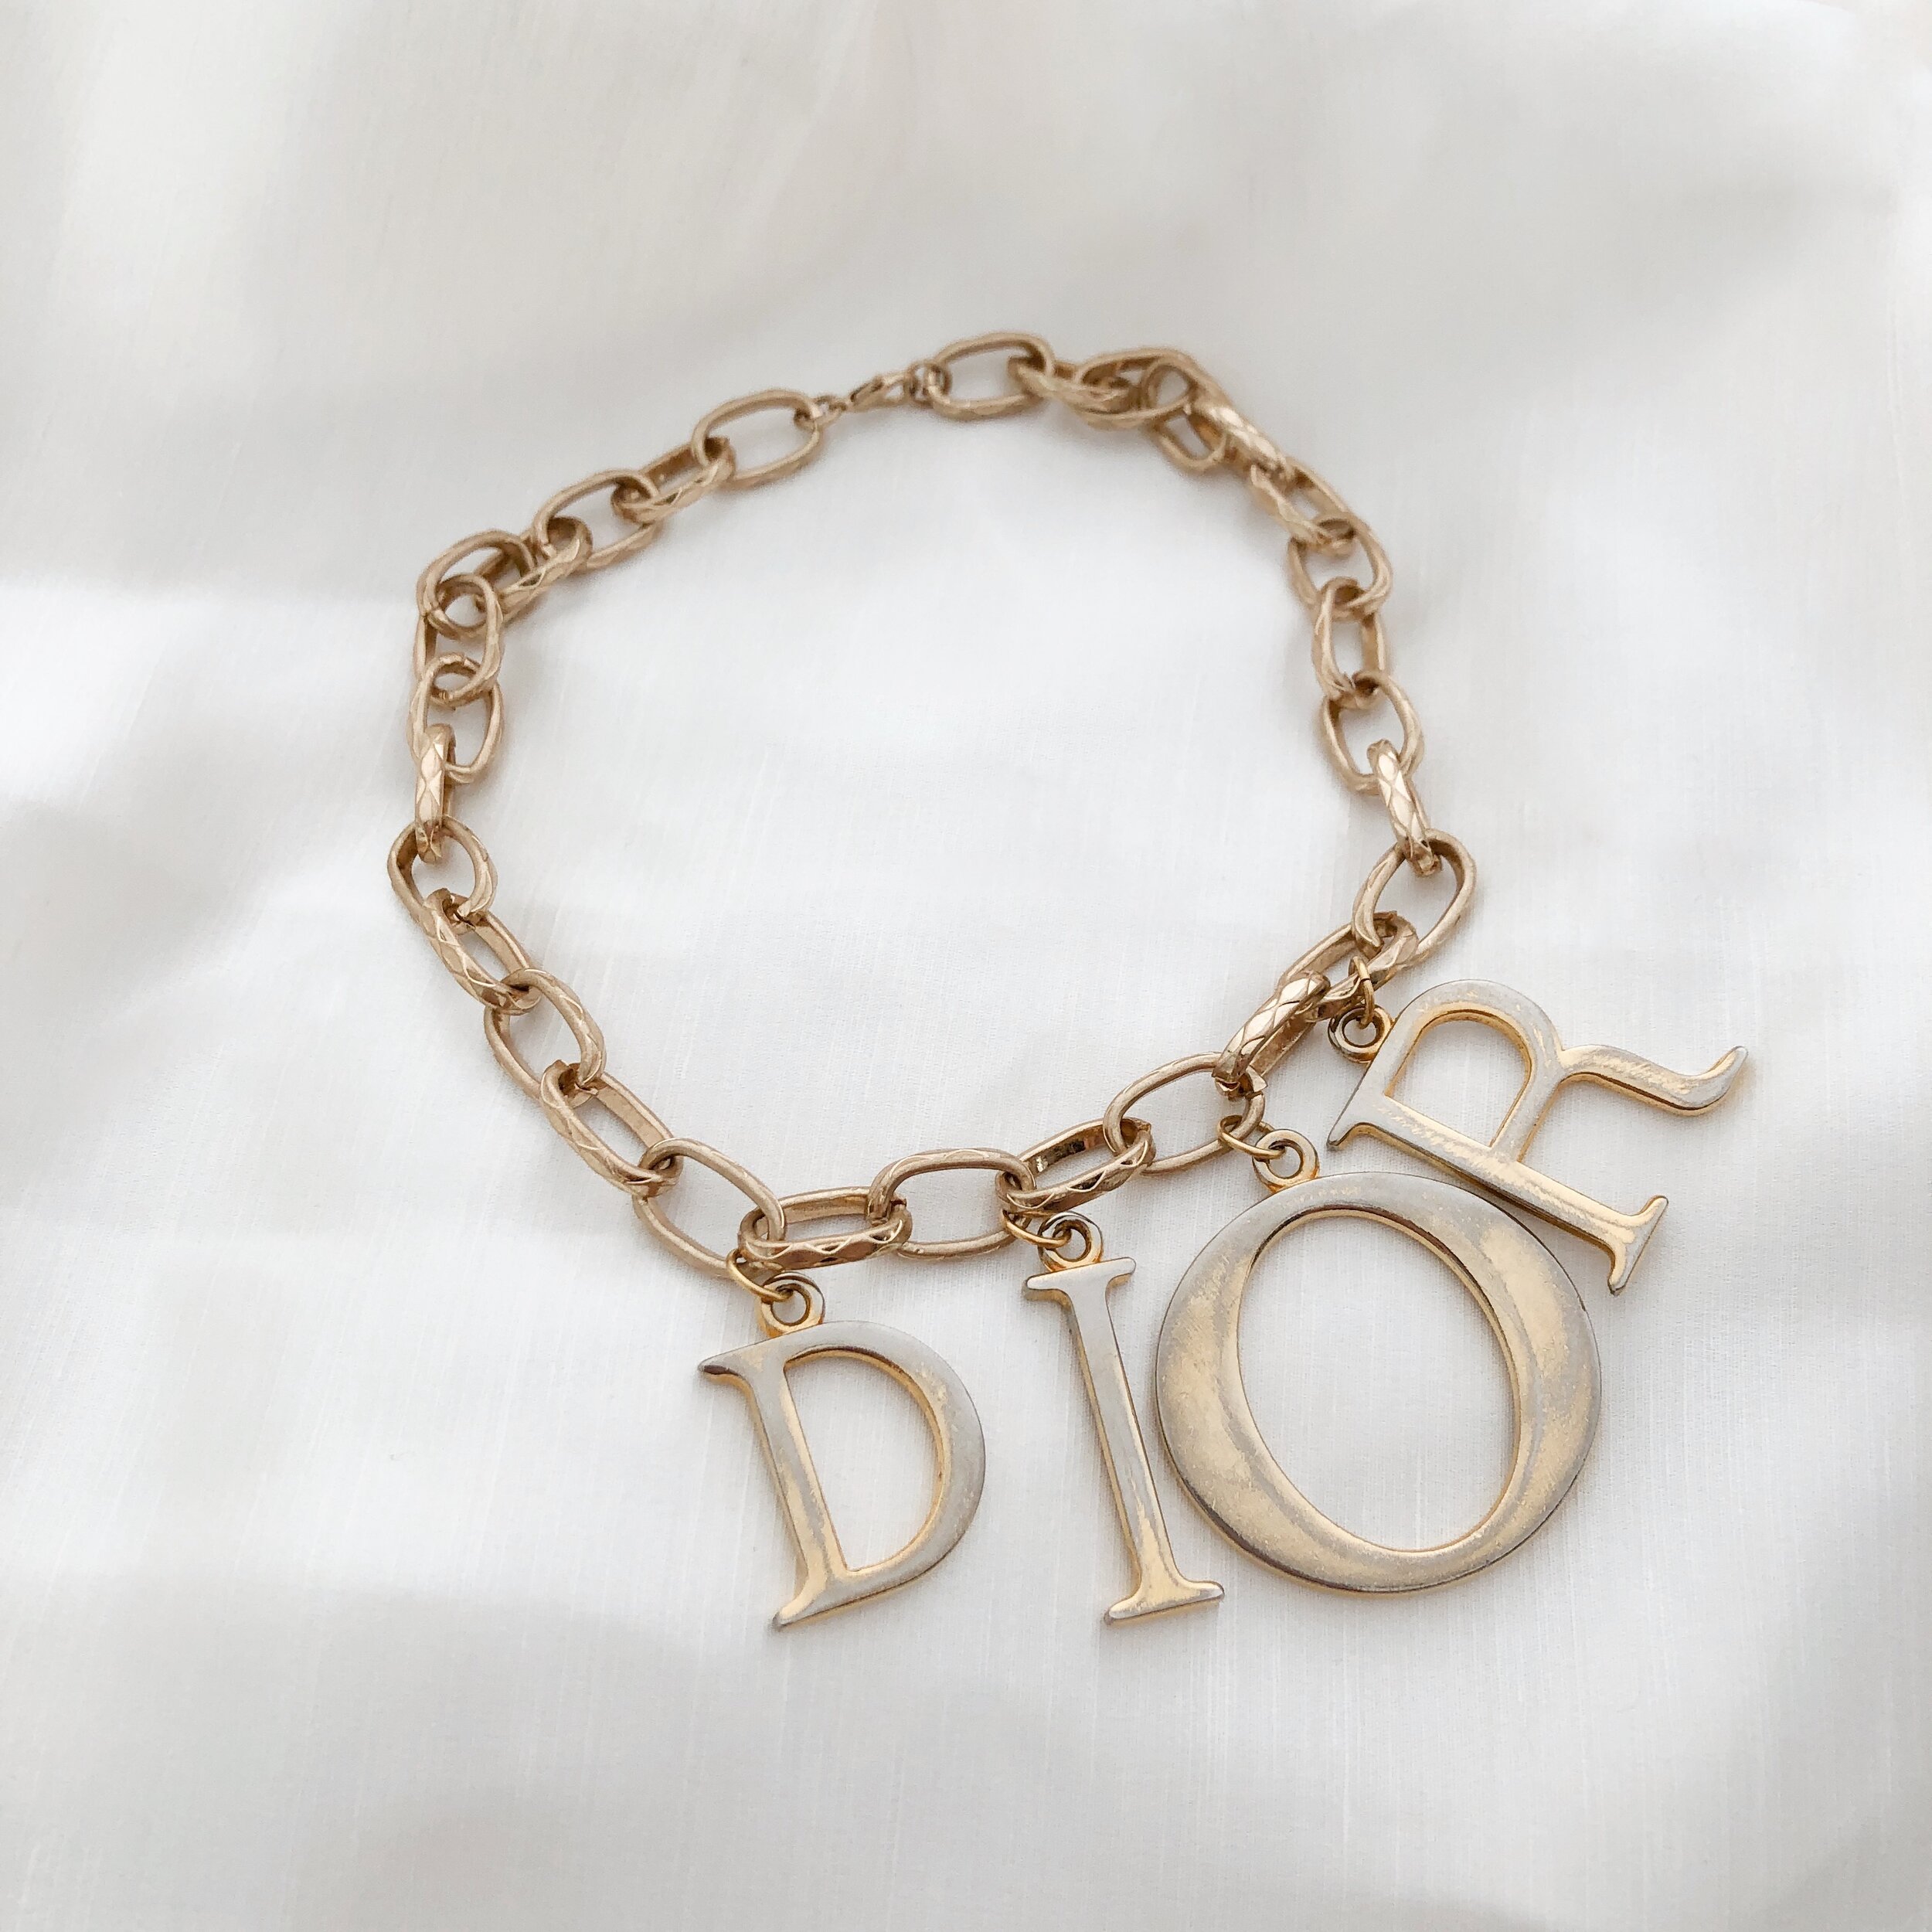 dior necklace letters